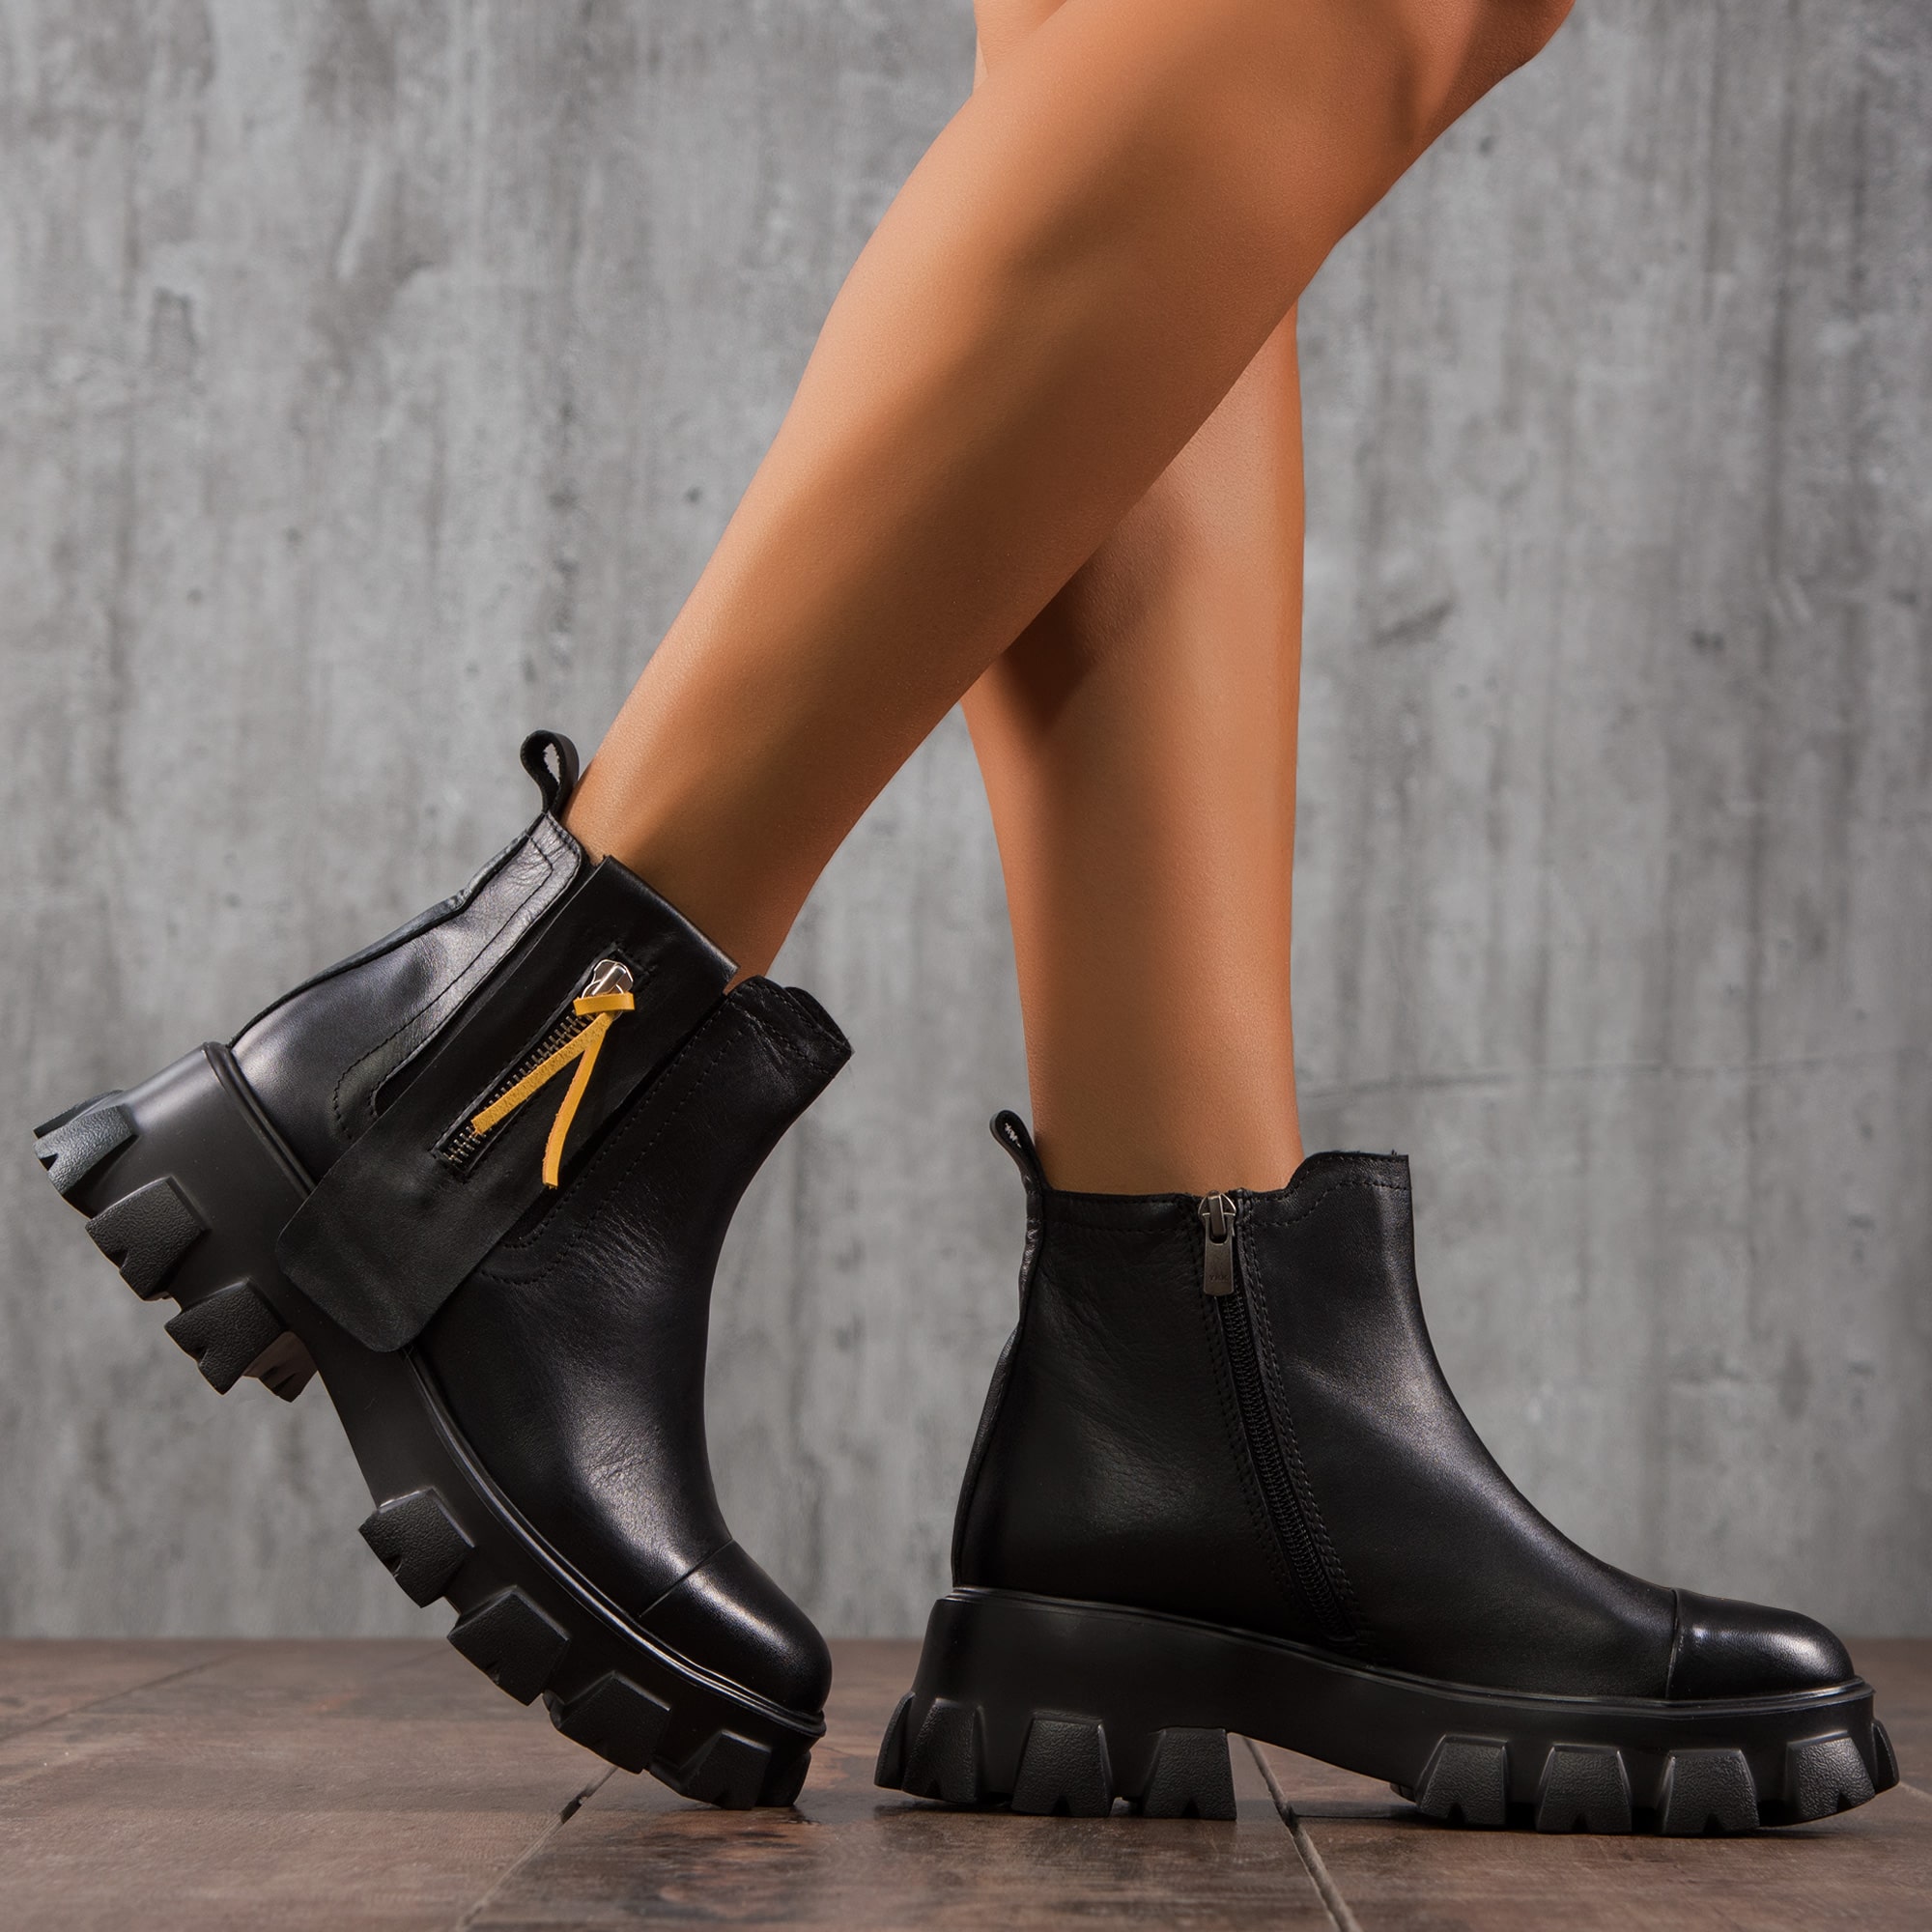 Solitary Leather Boots, Black Color